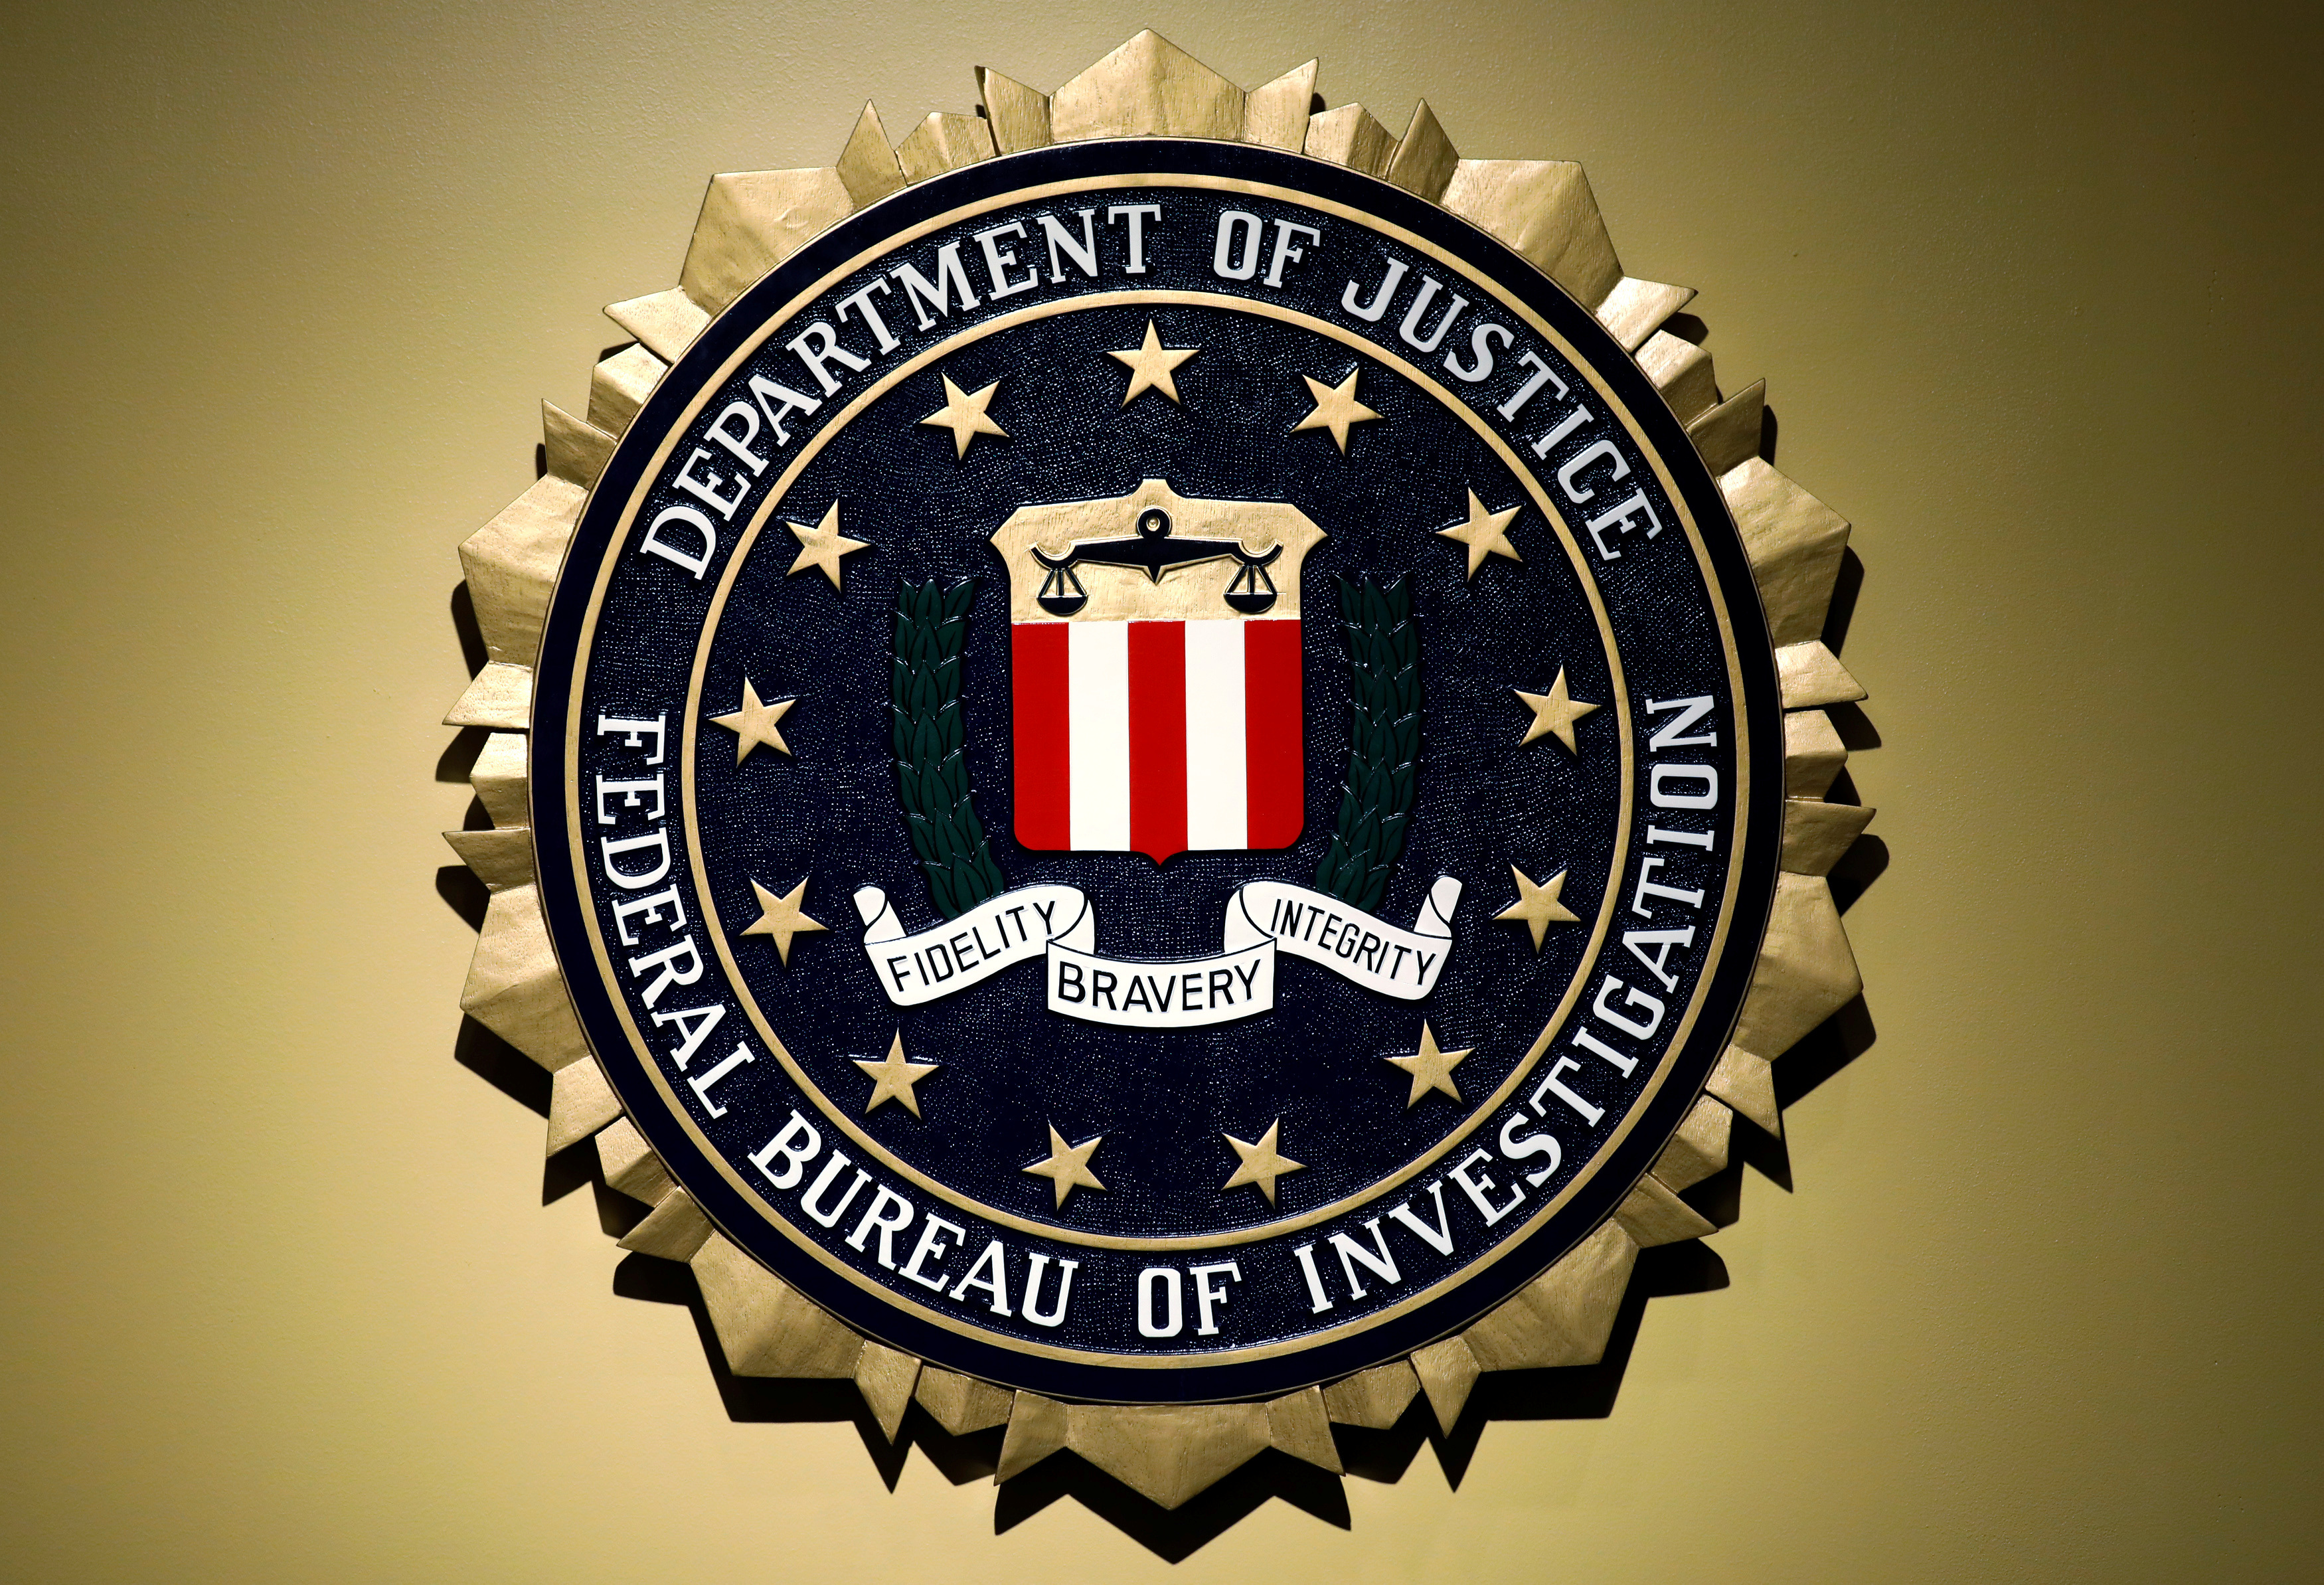 FBI misused intelligence database in 278,000 searches, court says